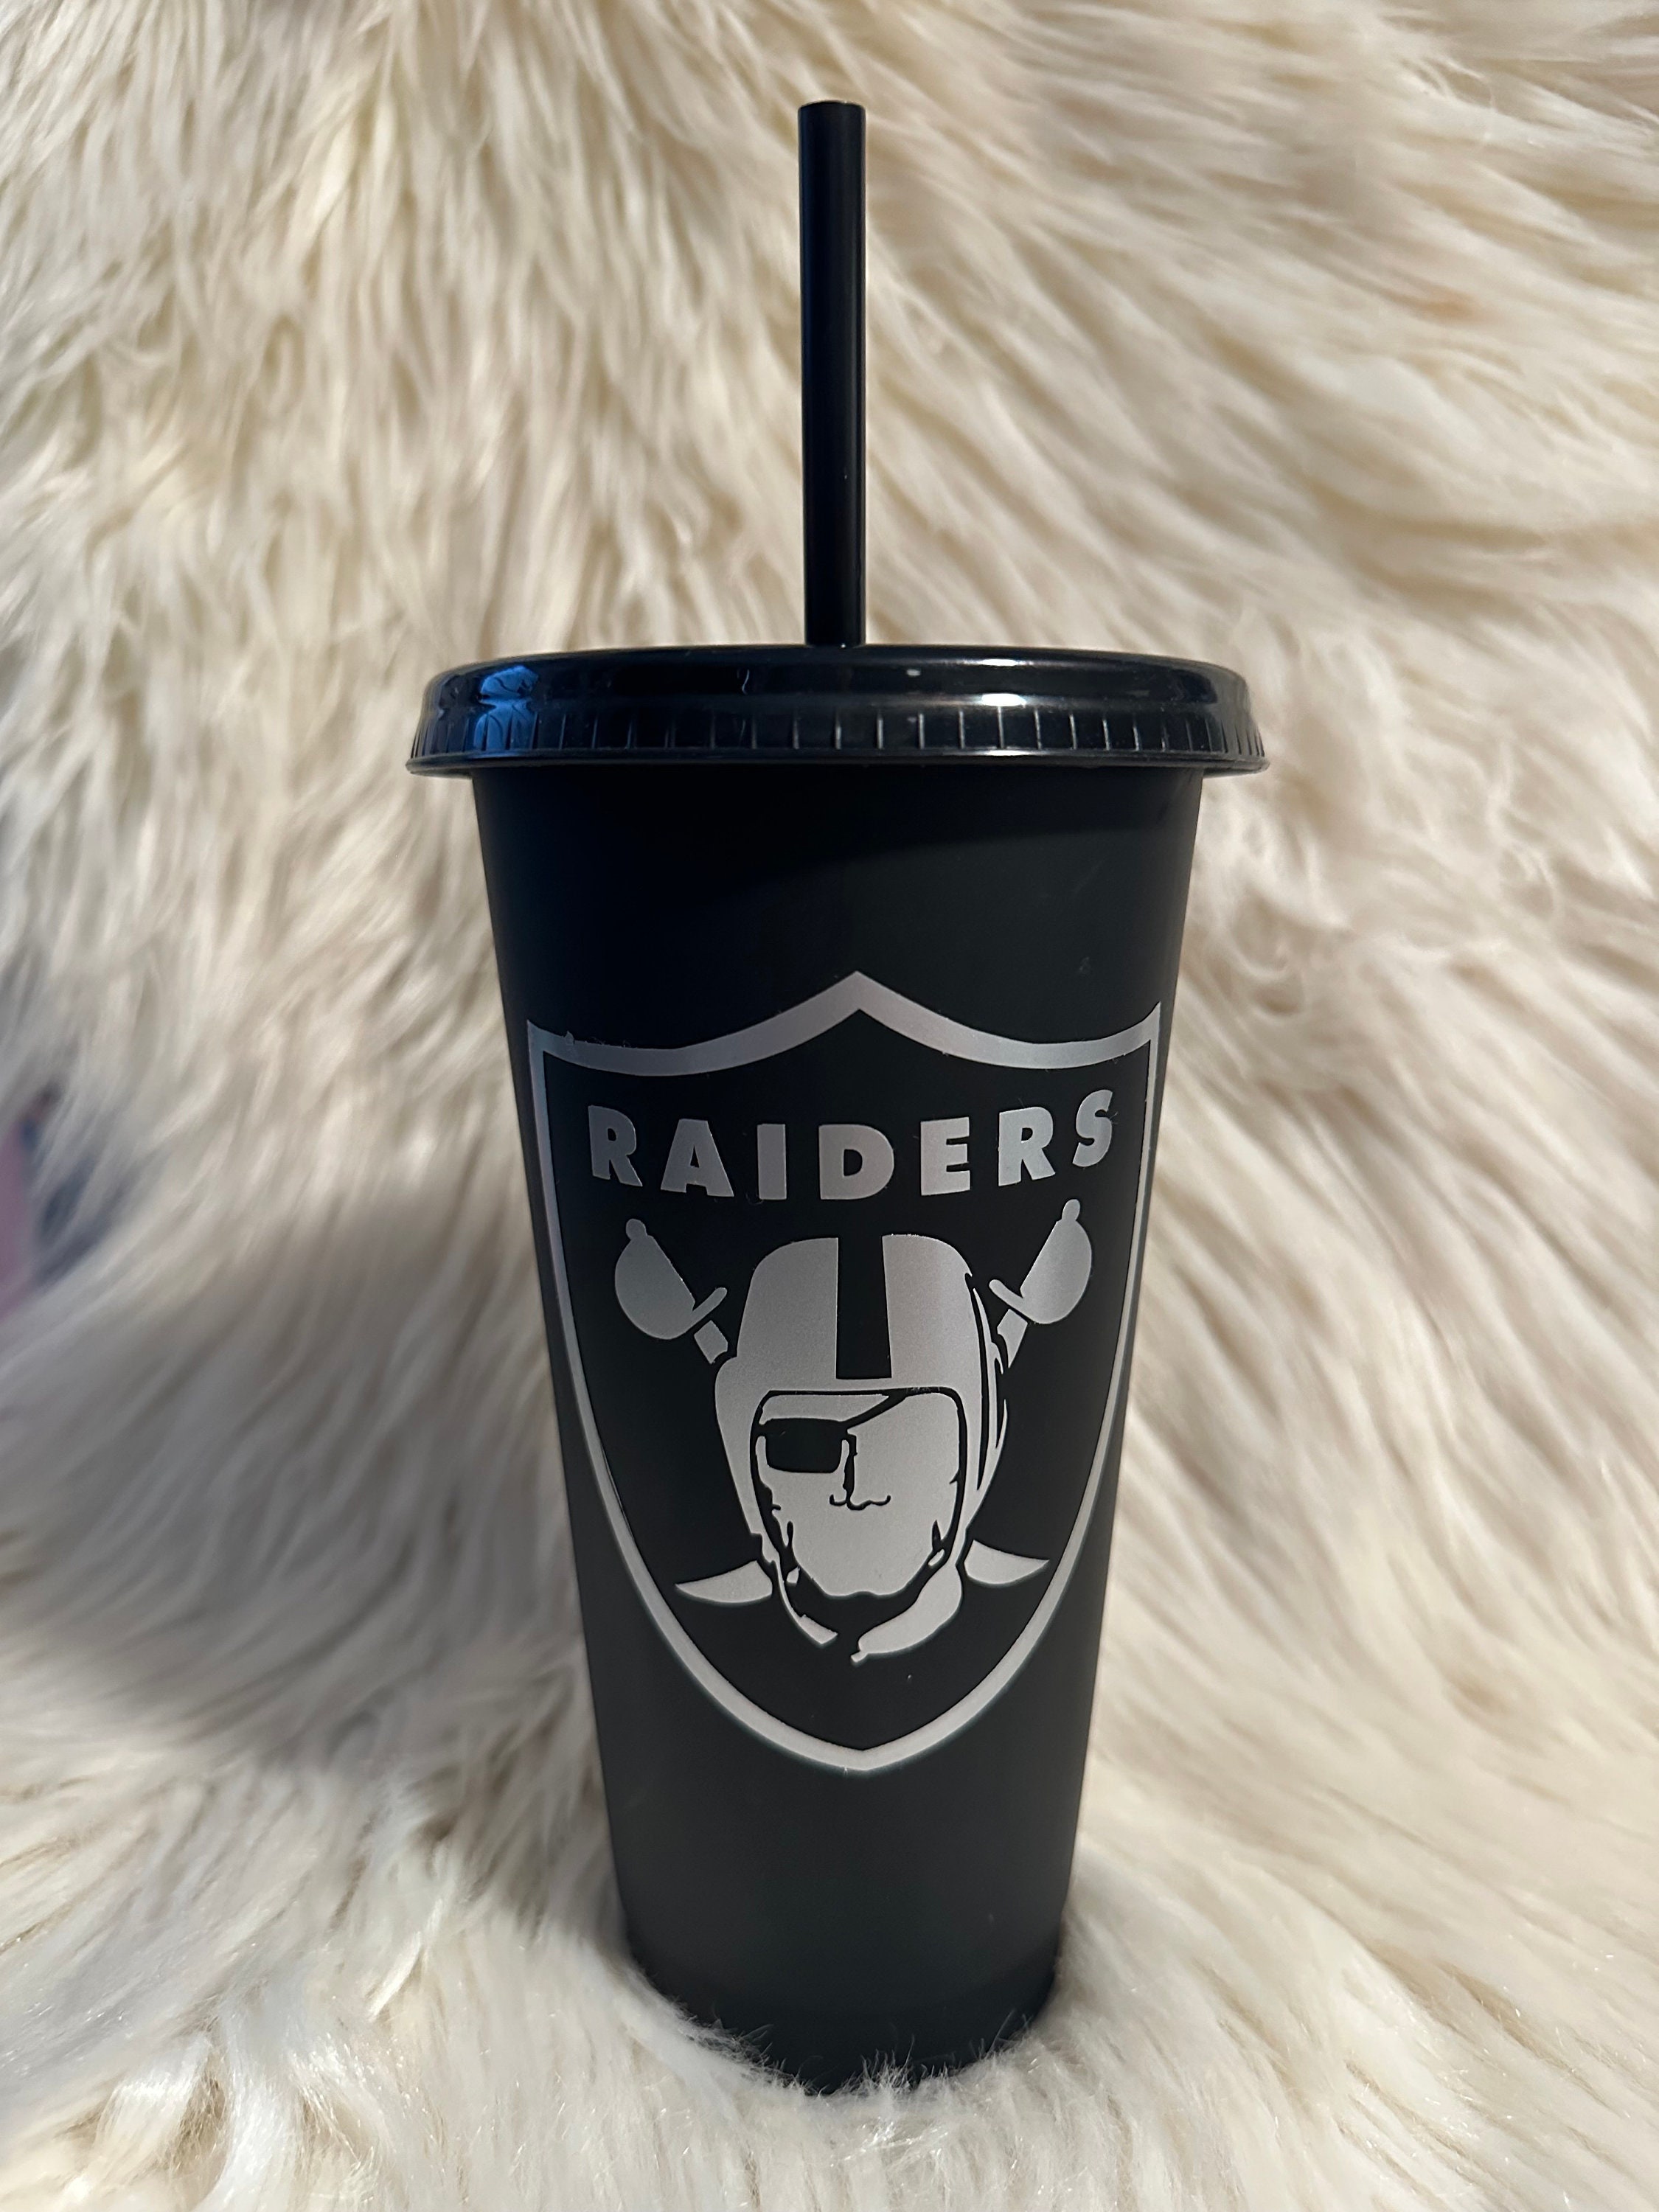 Simple Modern Officially Licensed NFL Las Vegas Raiders Gifts for Men,  Women, Dads, Fathers Day  Insulated Ranger Bottle Cooler for Standard  Glass Bottles - Beer, Seltzer, and Soda - Yahoo Shopping